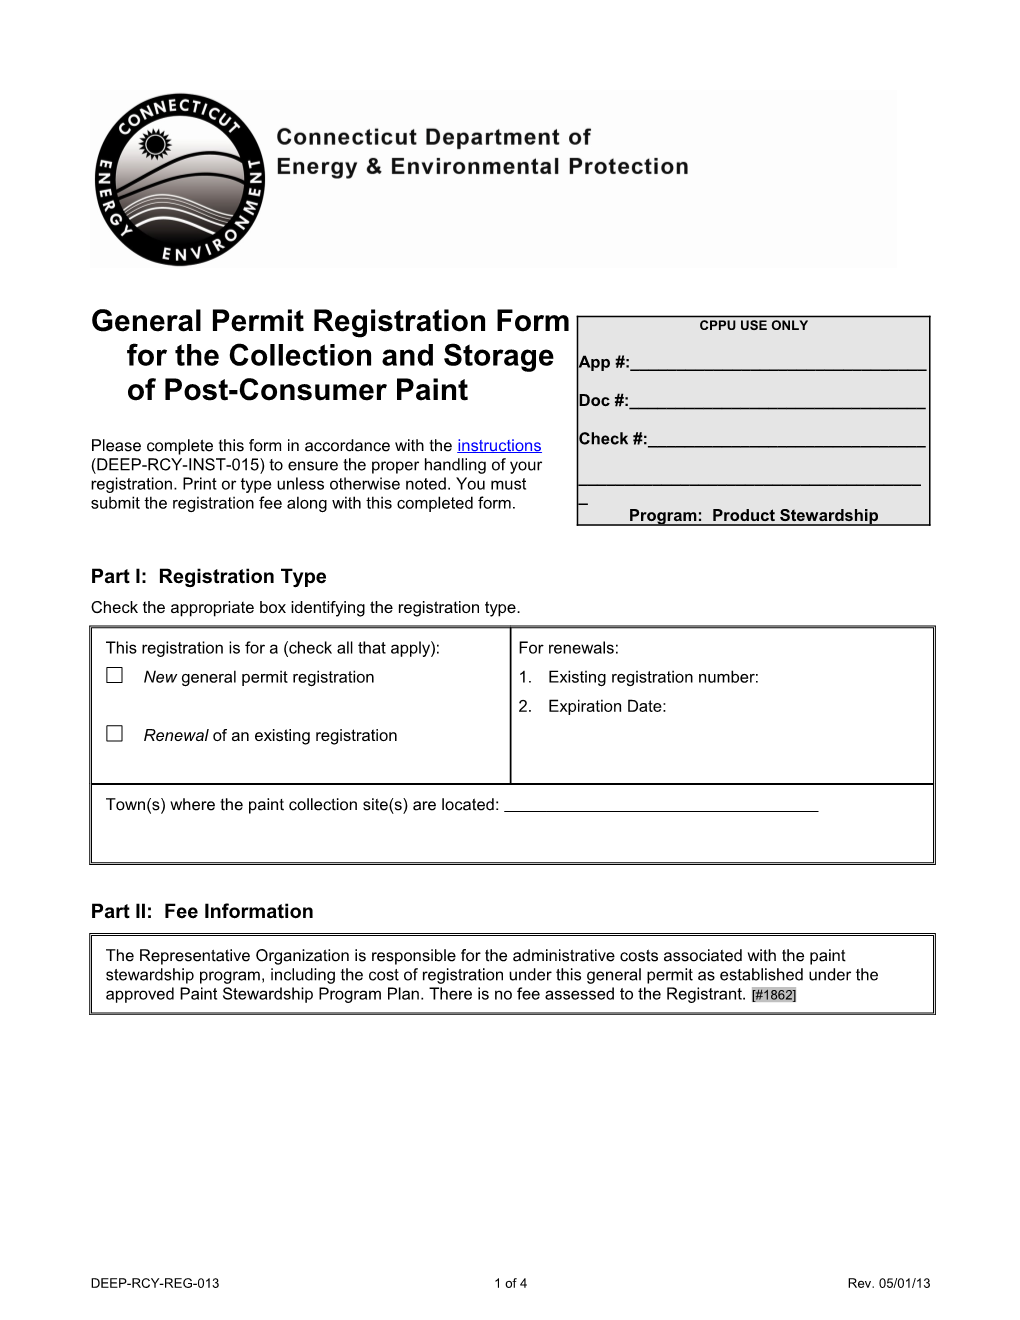 General Permit Registration Form for the Collection and Storage of Post Consumer Paint